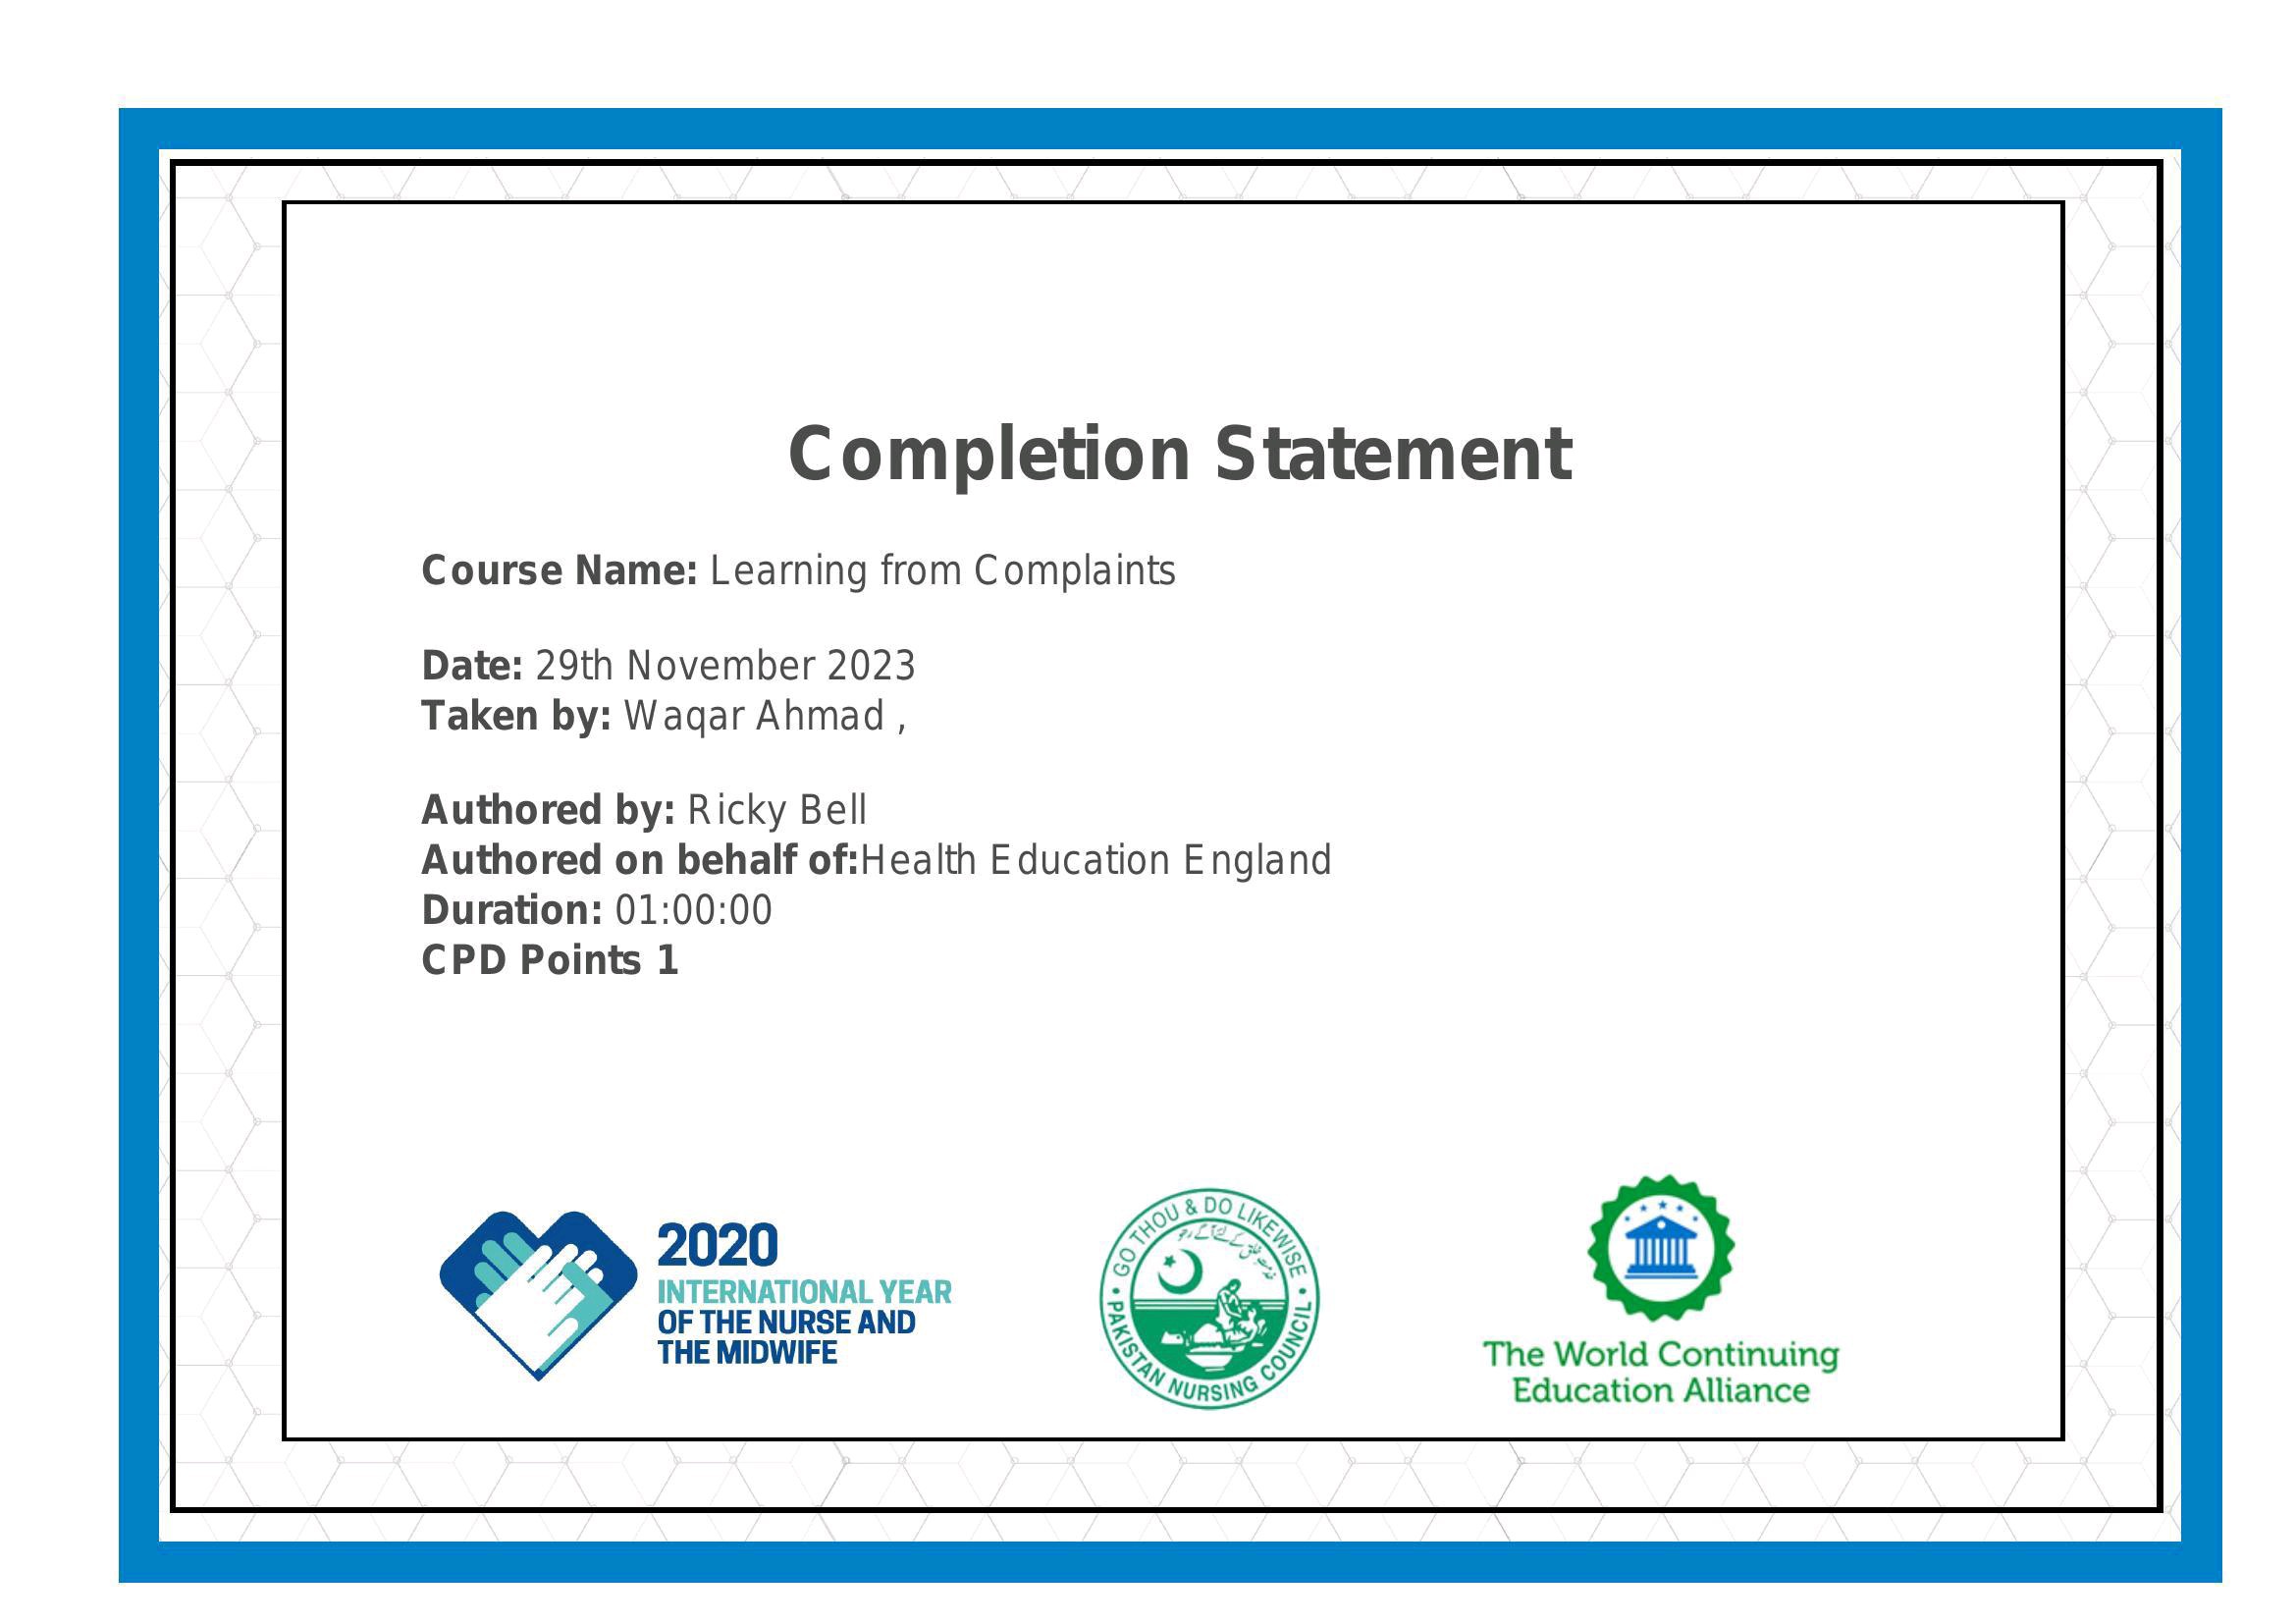 Completion Statement

Course Name: Learning from Complaints

Date: 29th November 2023
Taken by: Wagar Ahmad ,

Authored by: Ricky Bell

Authored on behalf of:Health Education England
Duration: 01:00:00

CPD Points 1

2020

INTERNATIONAL YEAR :

OF THE NURSE AND Ry

THE MIDWIFE : The World Continuing
Education Alliance